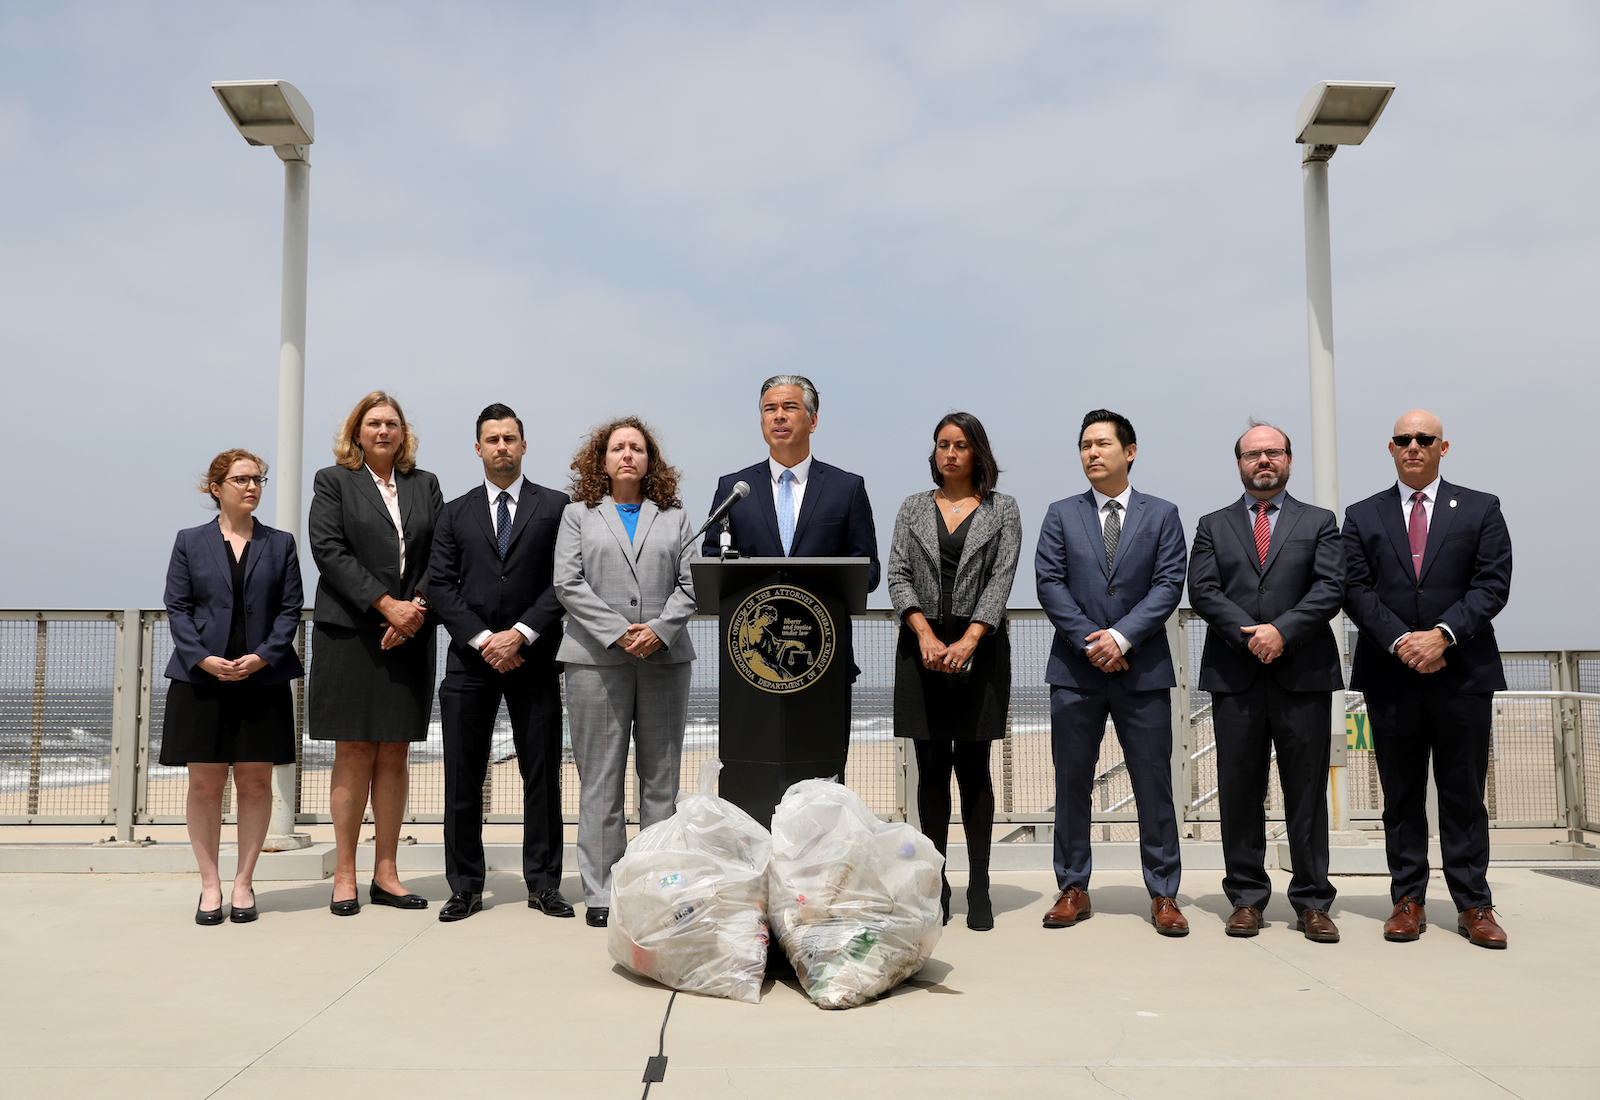 Attorney General Rob Bonta and his legal team stand on a beach with plastic bags in front of them